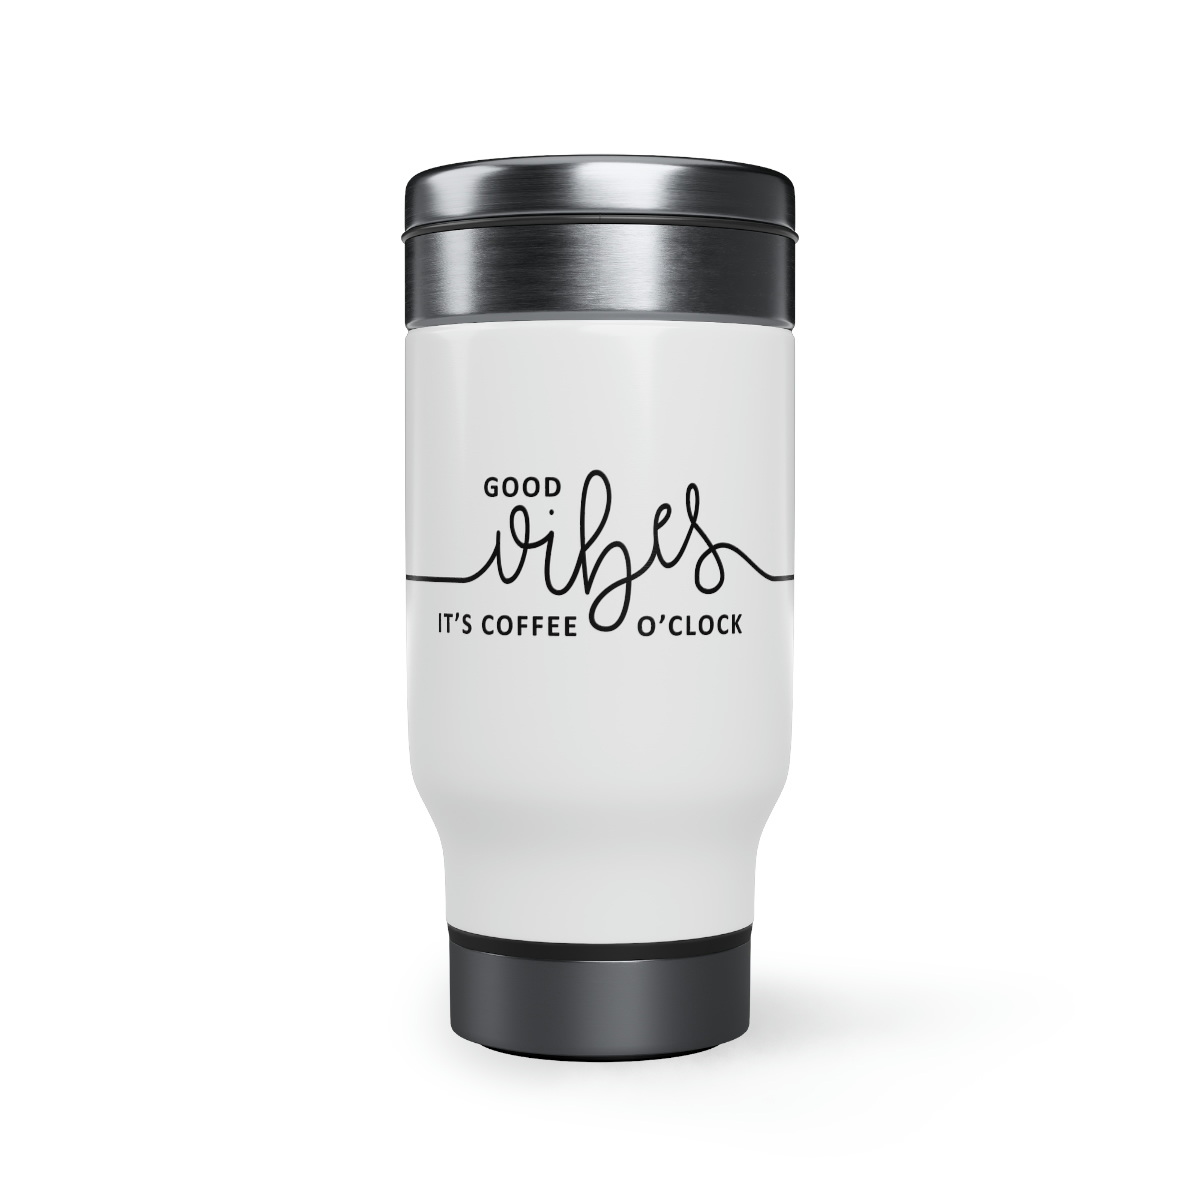 Reel Cool Dad - Insulated Stainless Steel Coffee Mug – OkieSpice and Trade  Co